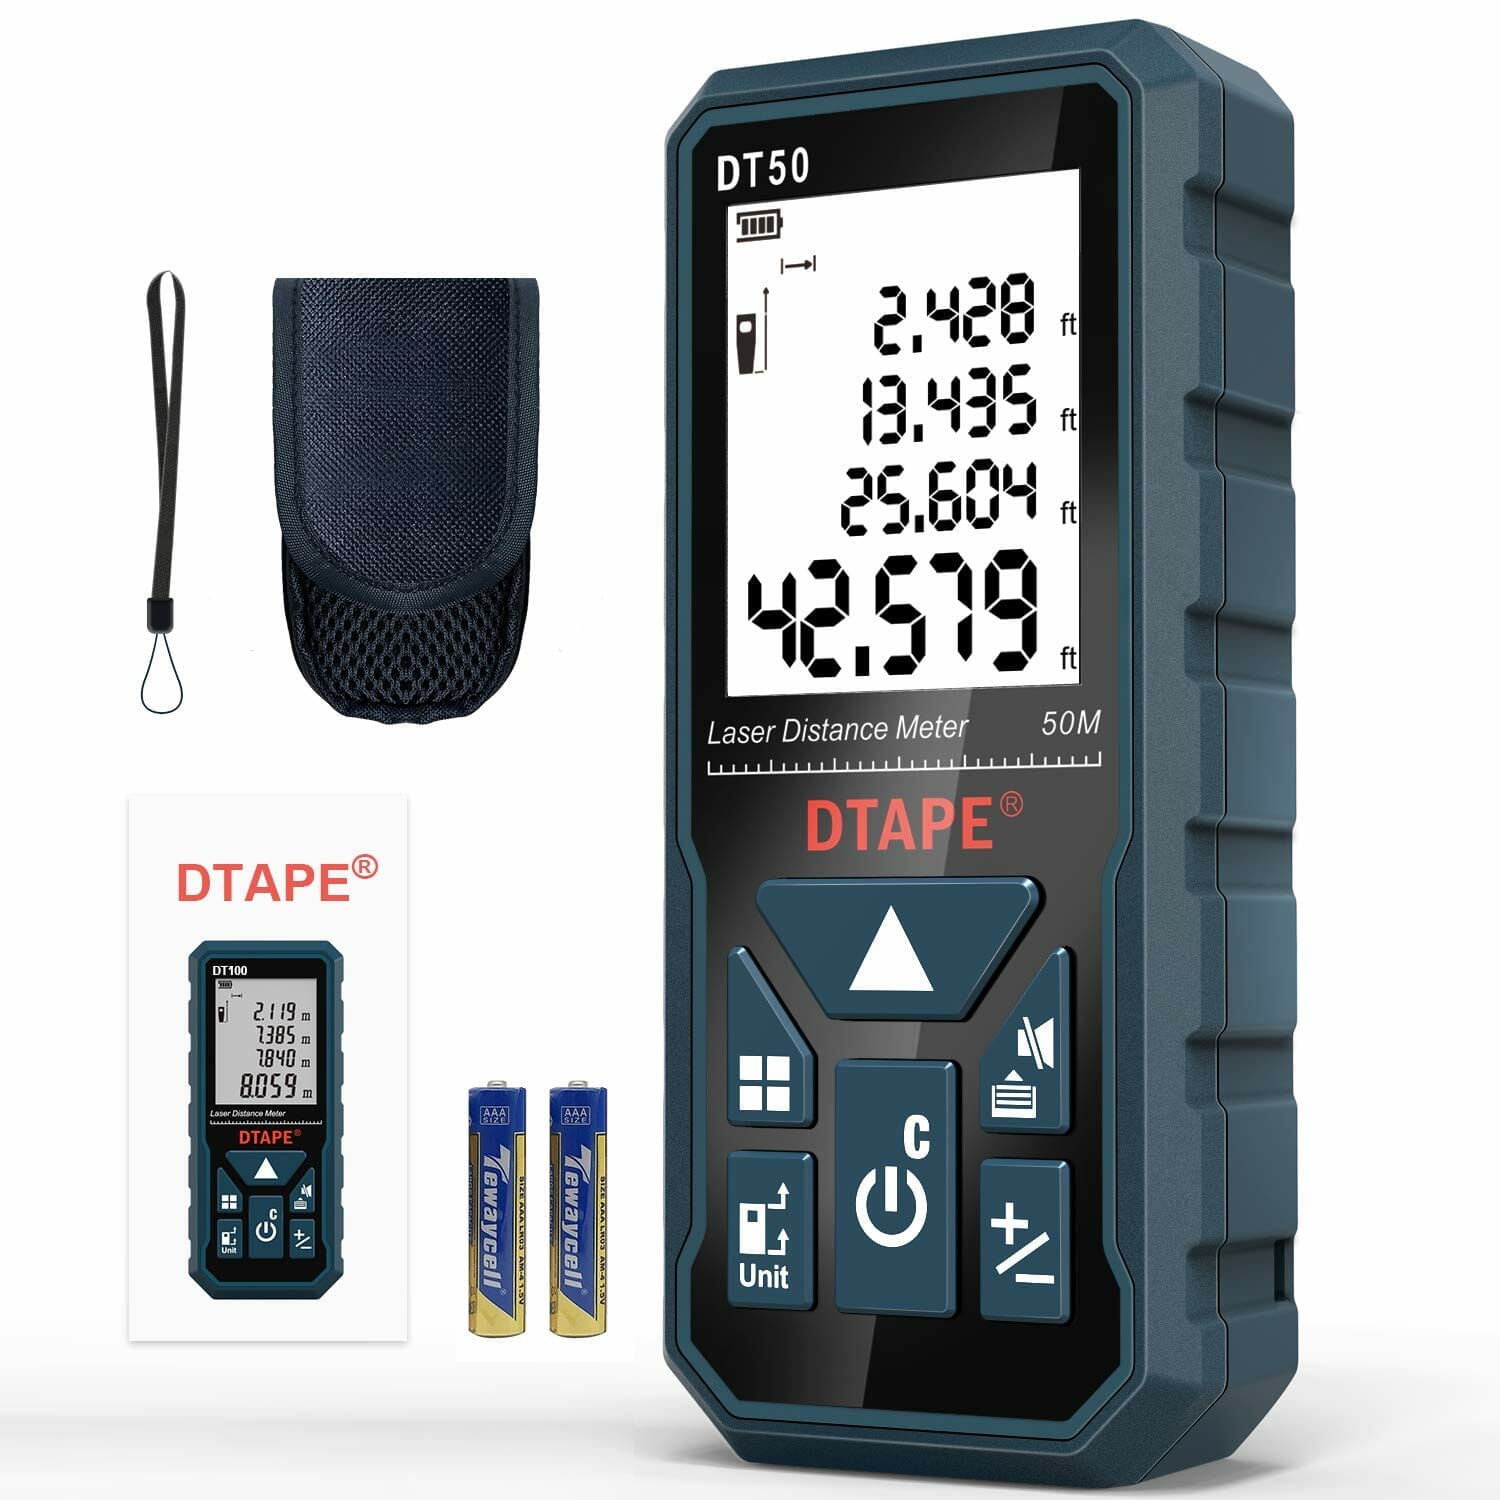 A compact DTAPE digital distance meter for accurate measurements, including batteries and essential accessories.